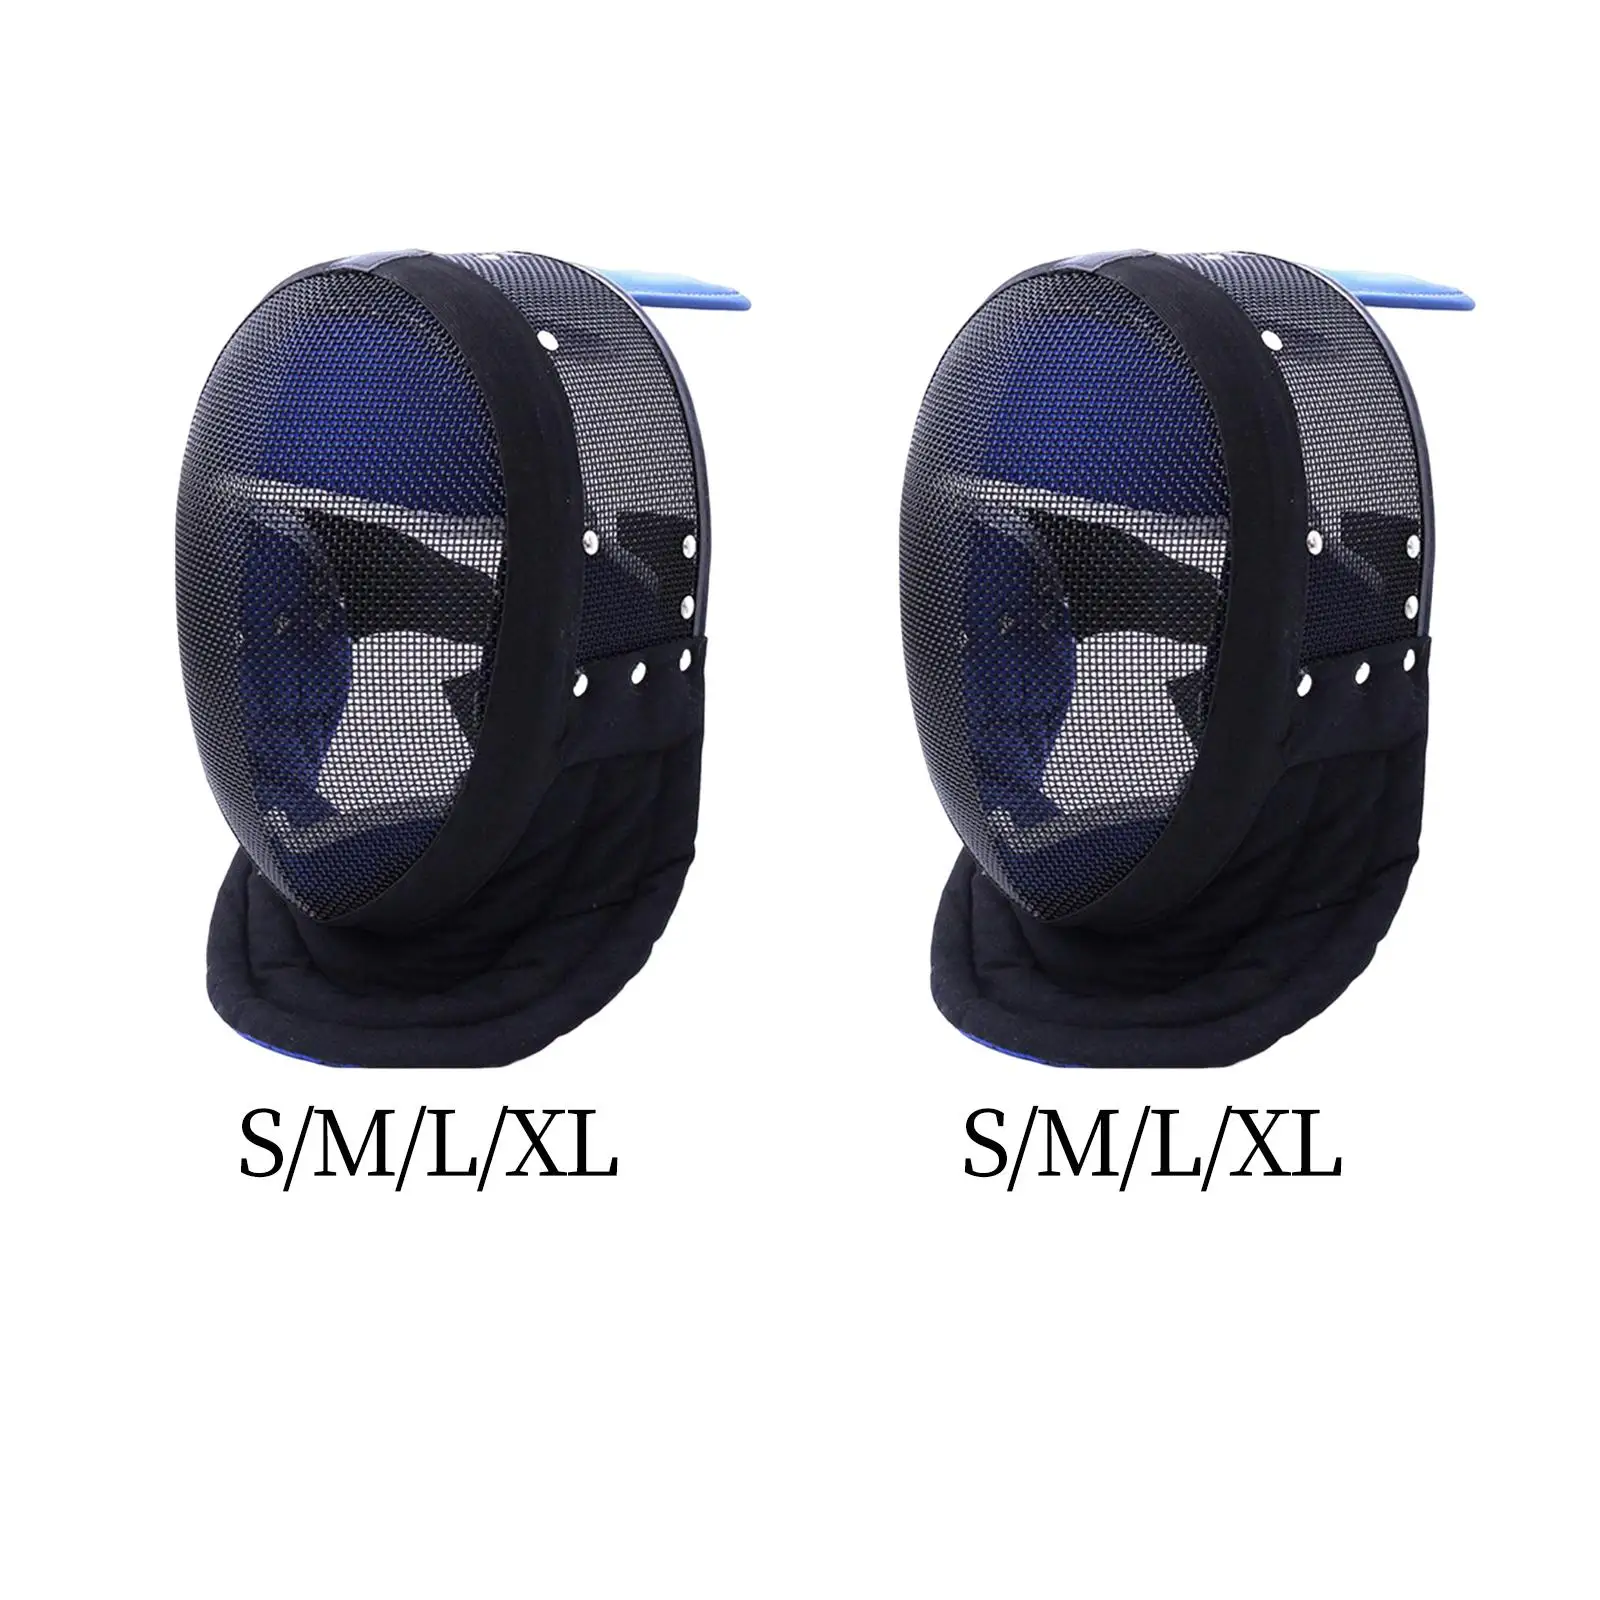 Multifunction Fencing Helmet Competition Protection Cover Durable Sports Fencing Protect for Fencing Supplies Device Training